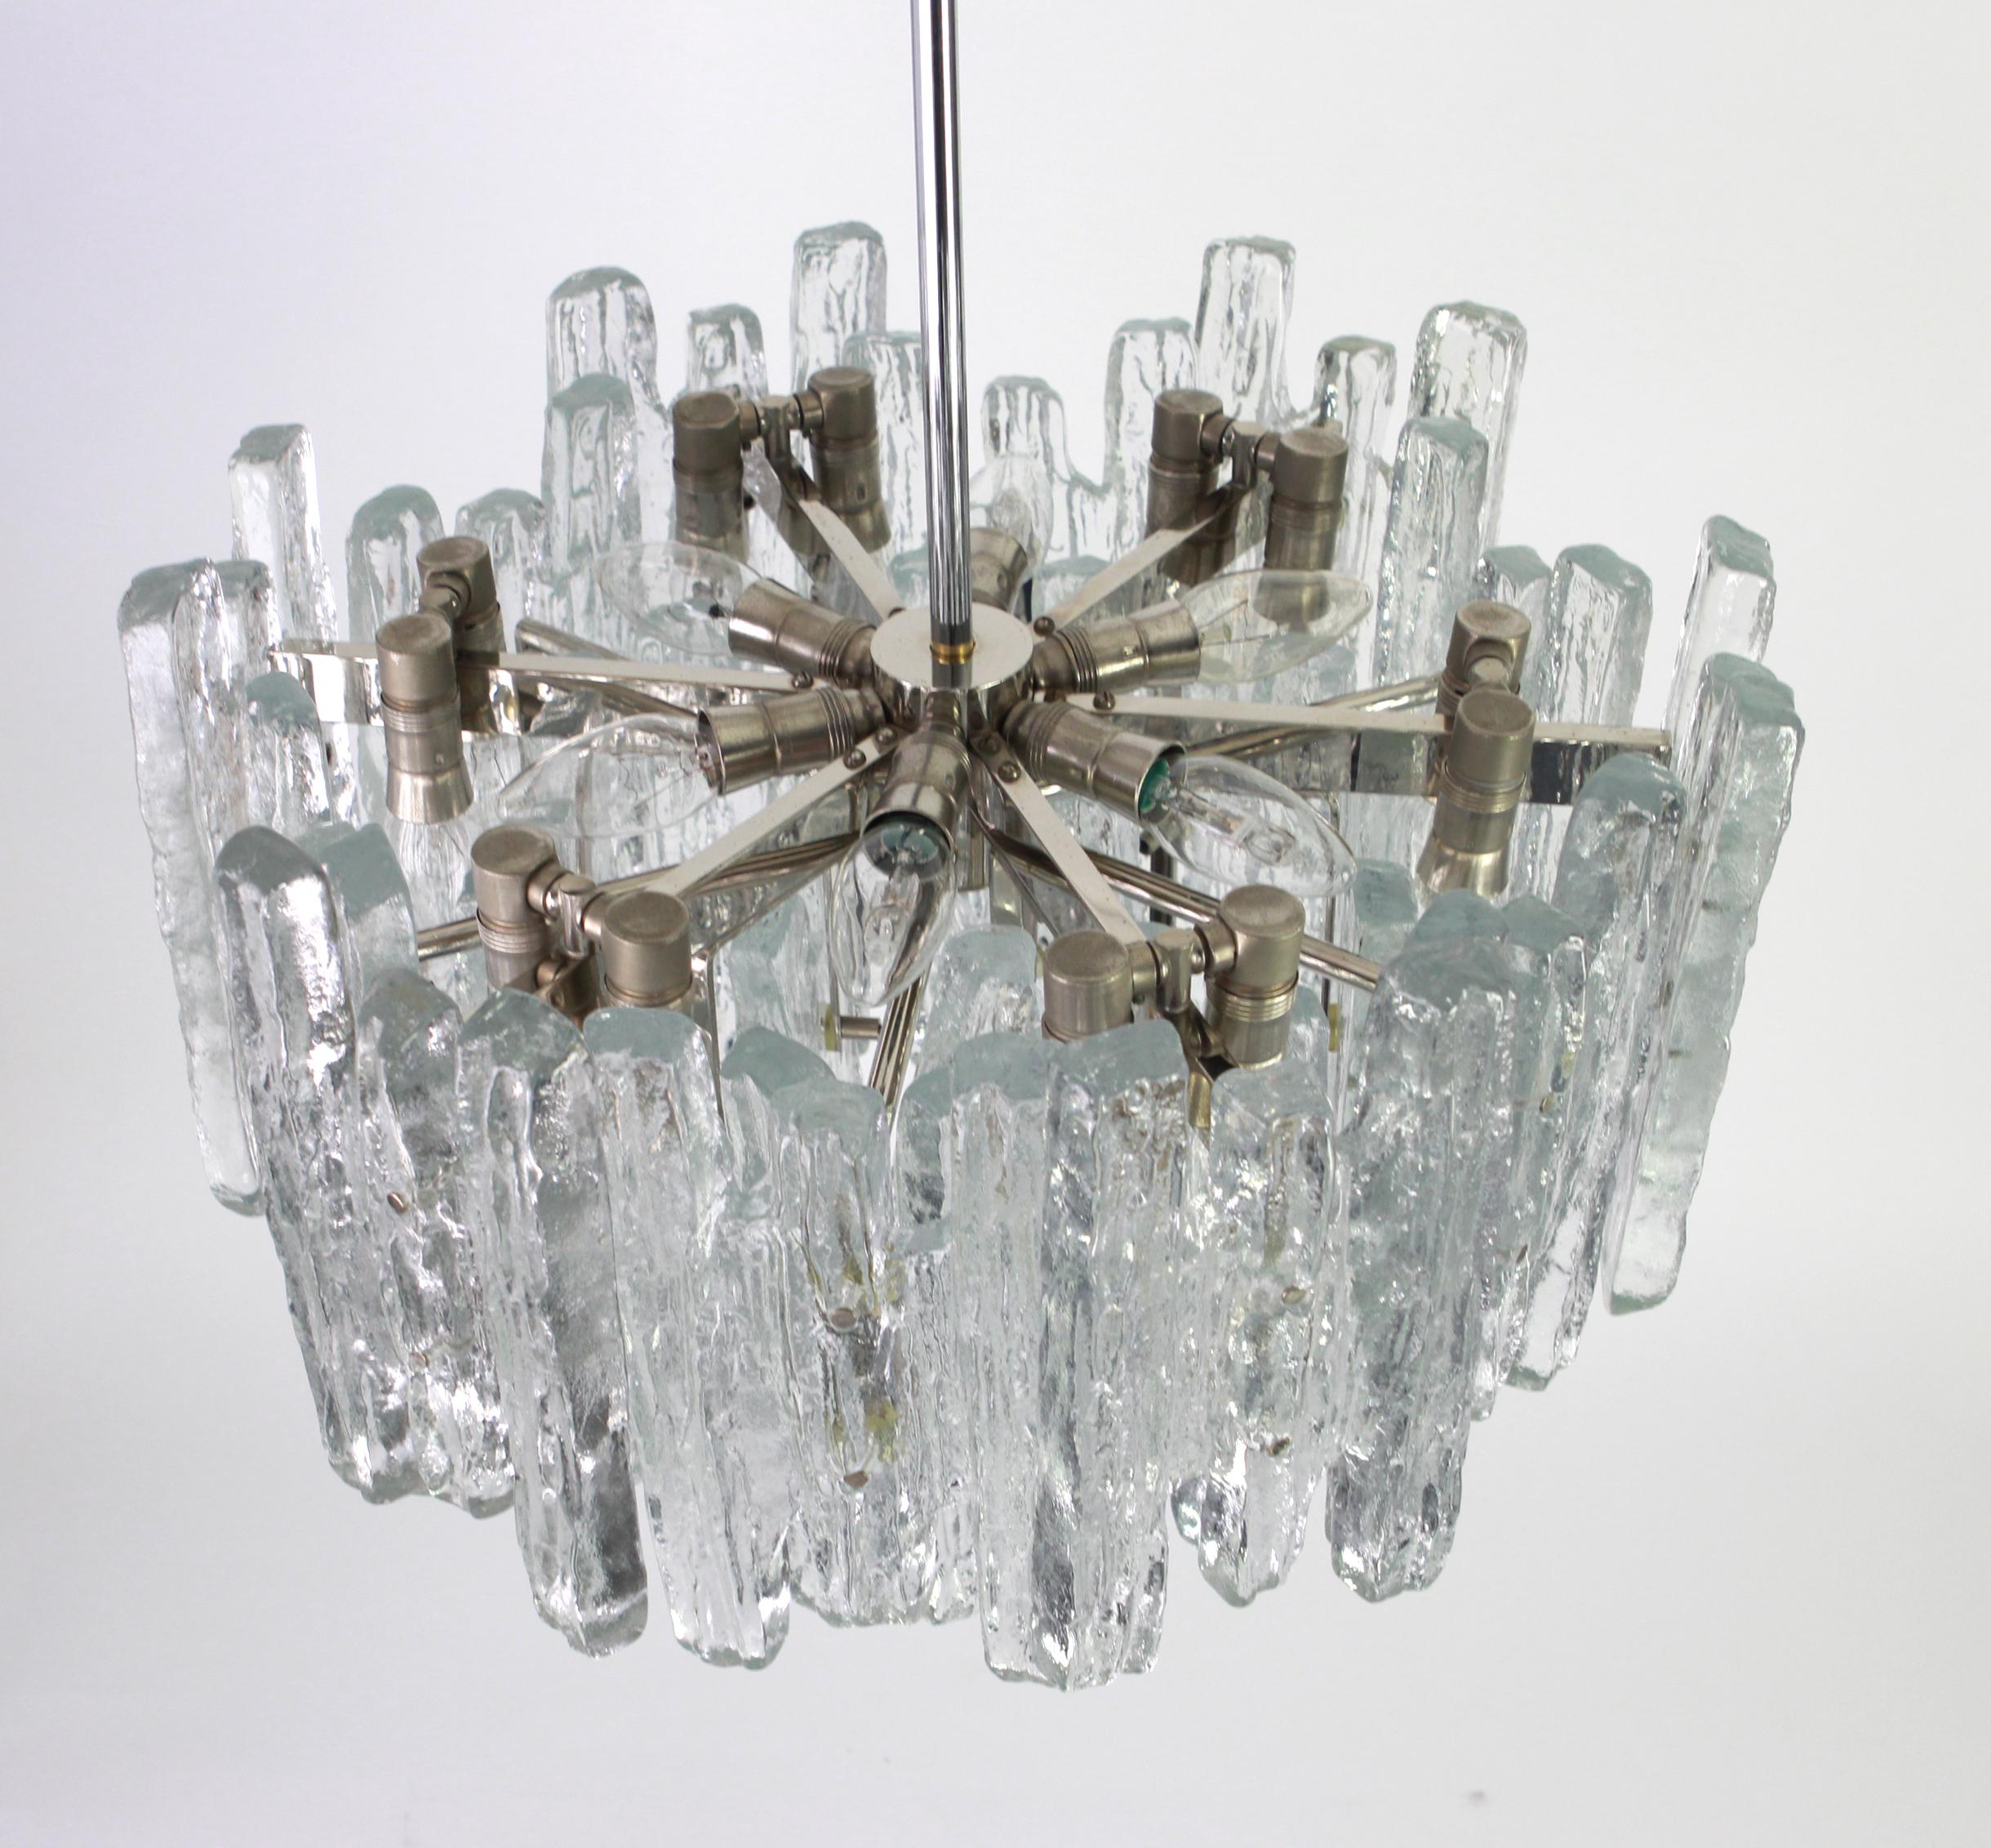 1 of 2 Large Rare Murano Ice Glass Chandelier by Kalmar, Austria, 1960s For Sale 3